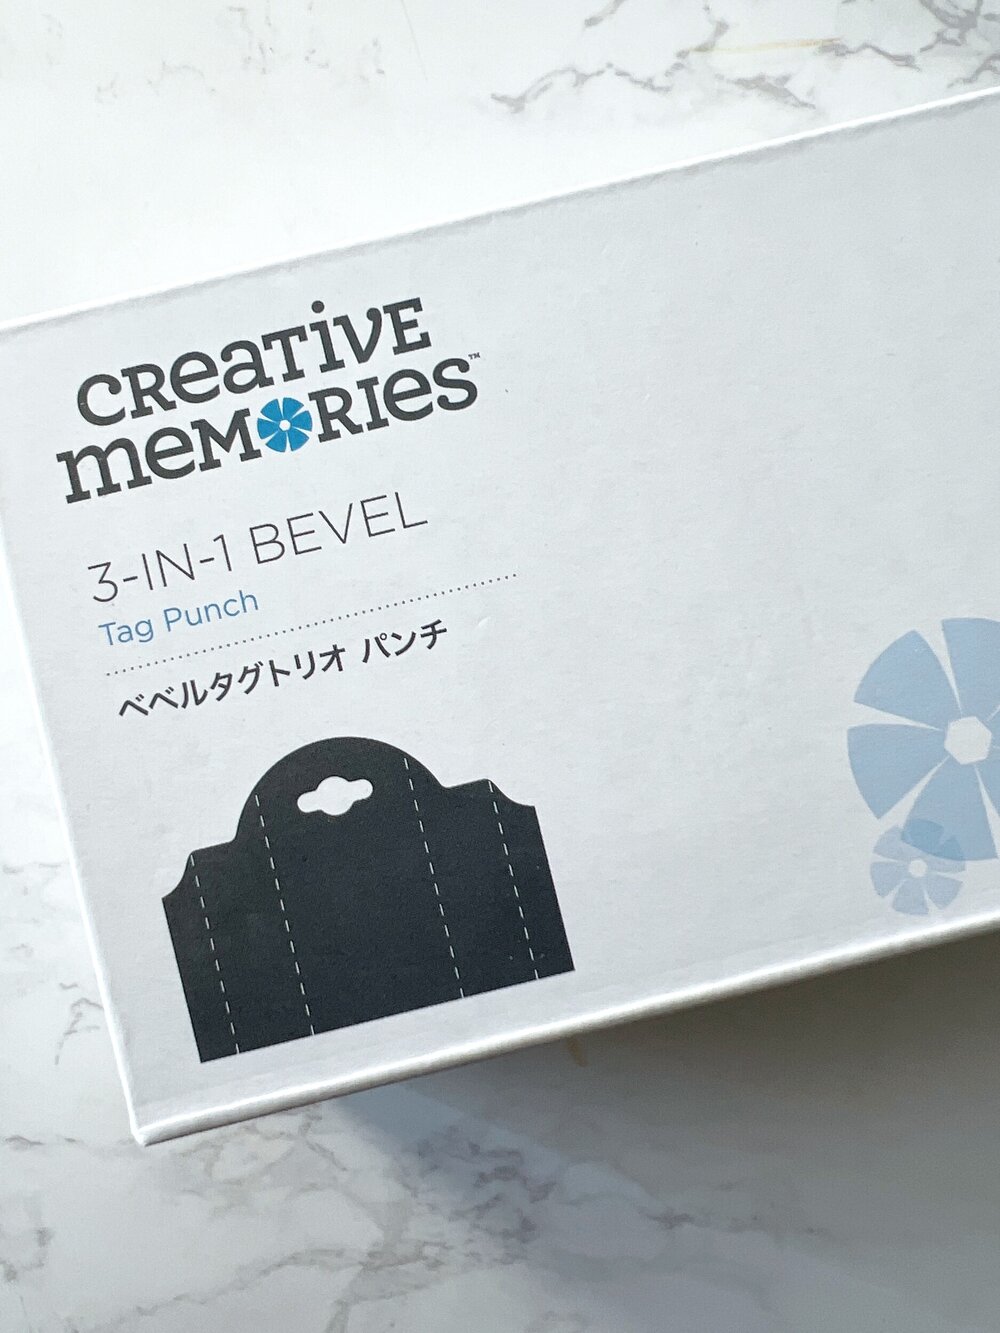 3-in-1 Bevel Tag punch — Craft Some Joy